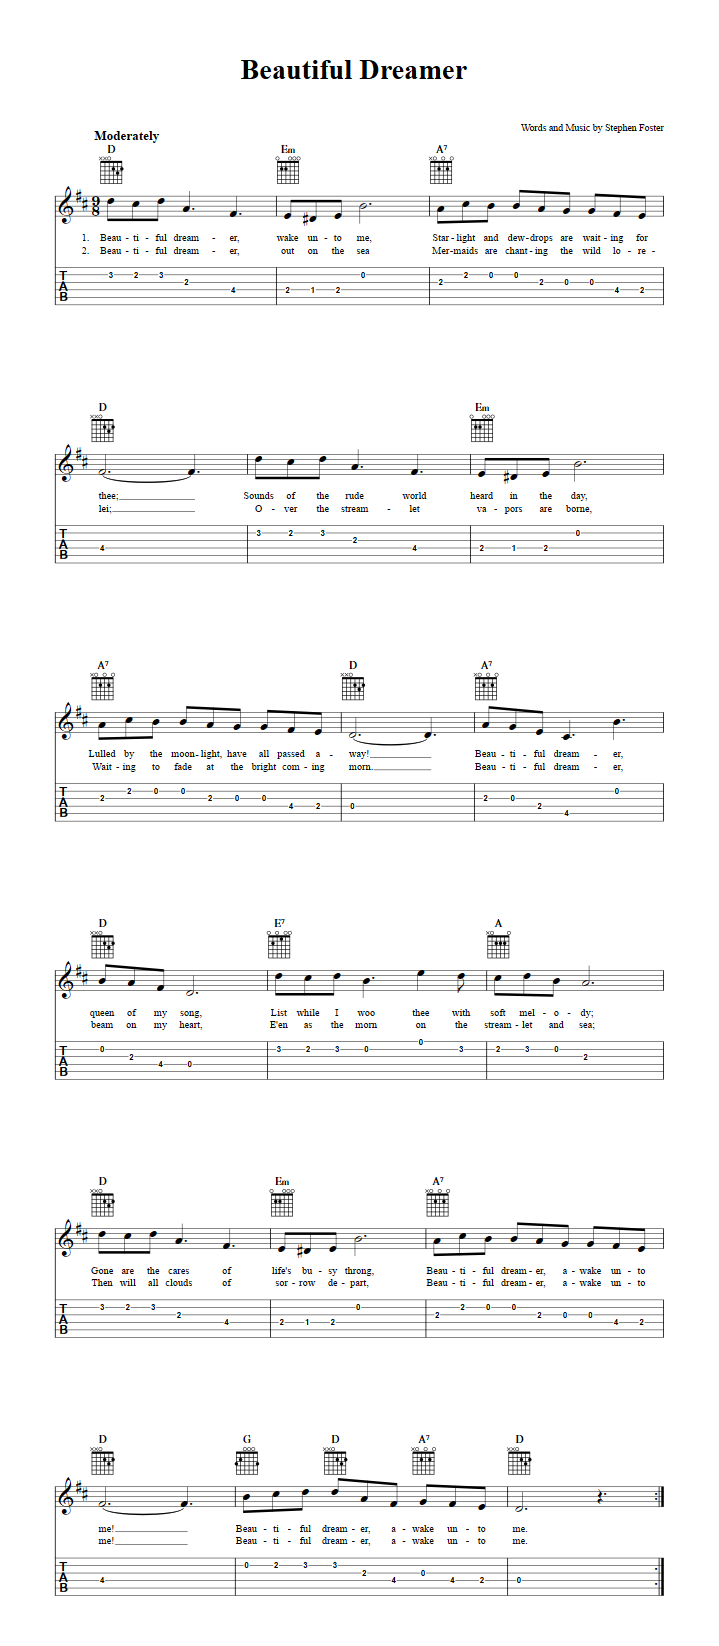 Beautiful Dreamer Chords Sheet Music And Tab For Guitar With Lyrics